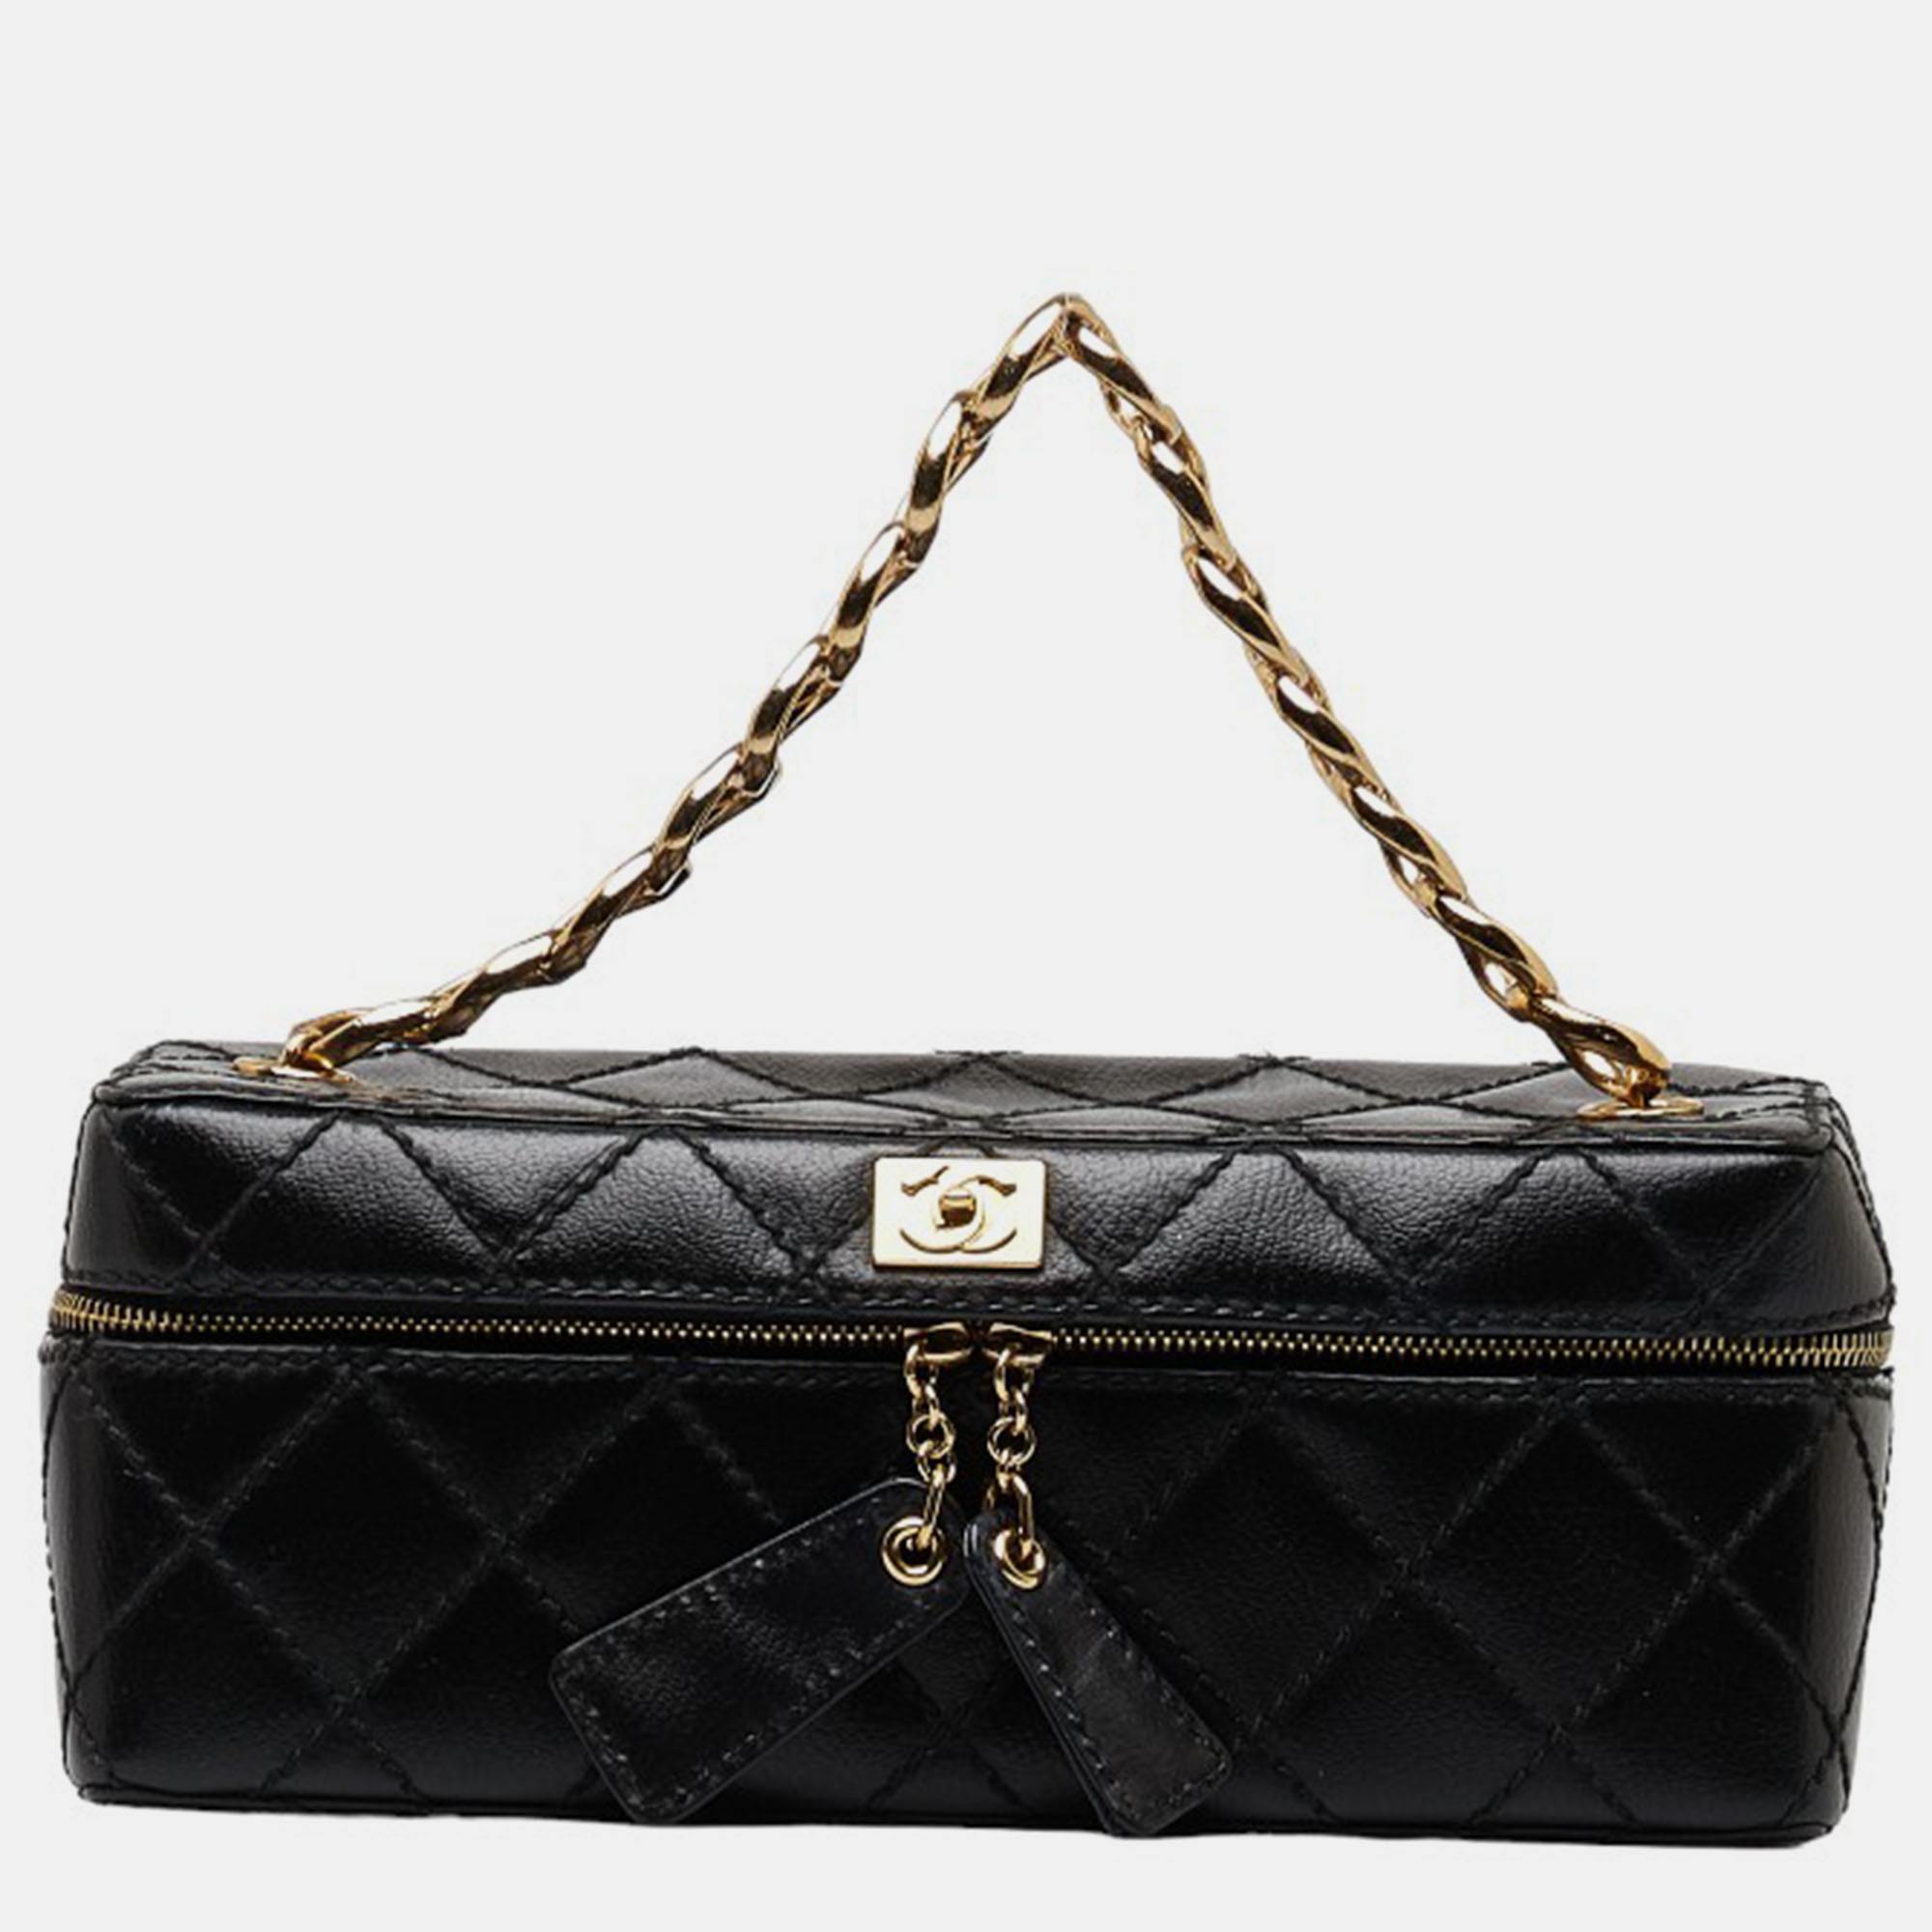 

Chanel Black Leather Quilted Leather Chain Vanity Bag